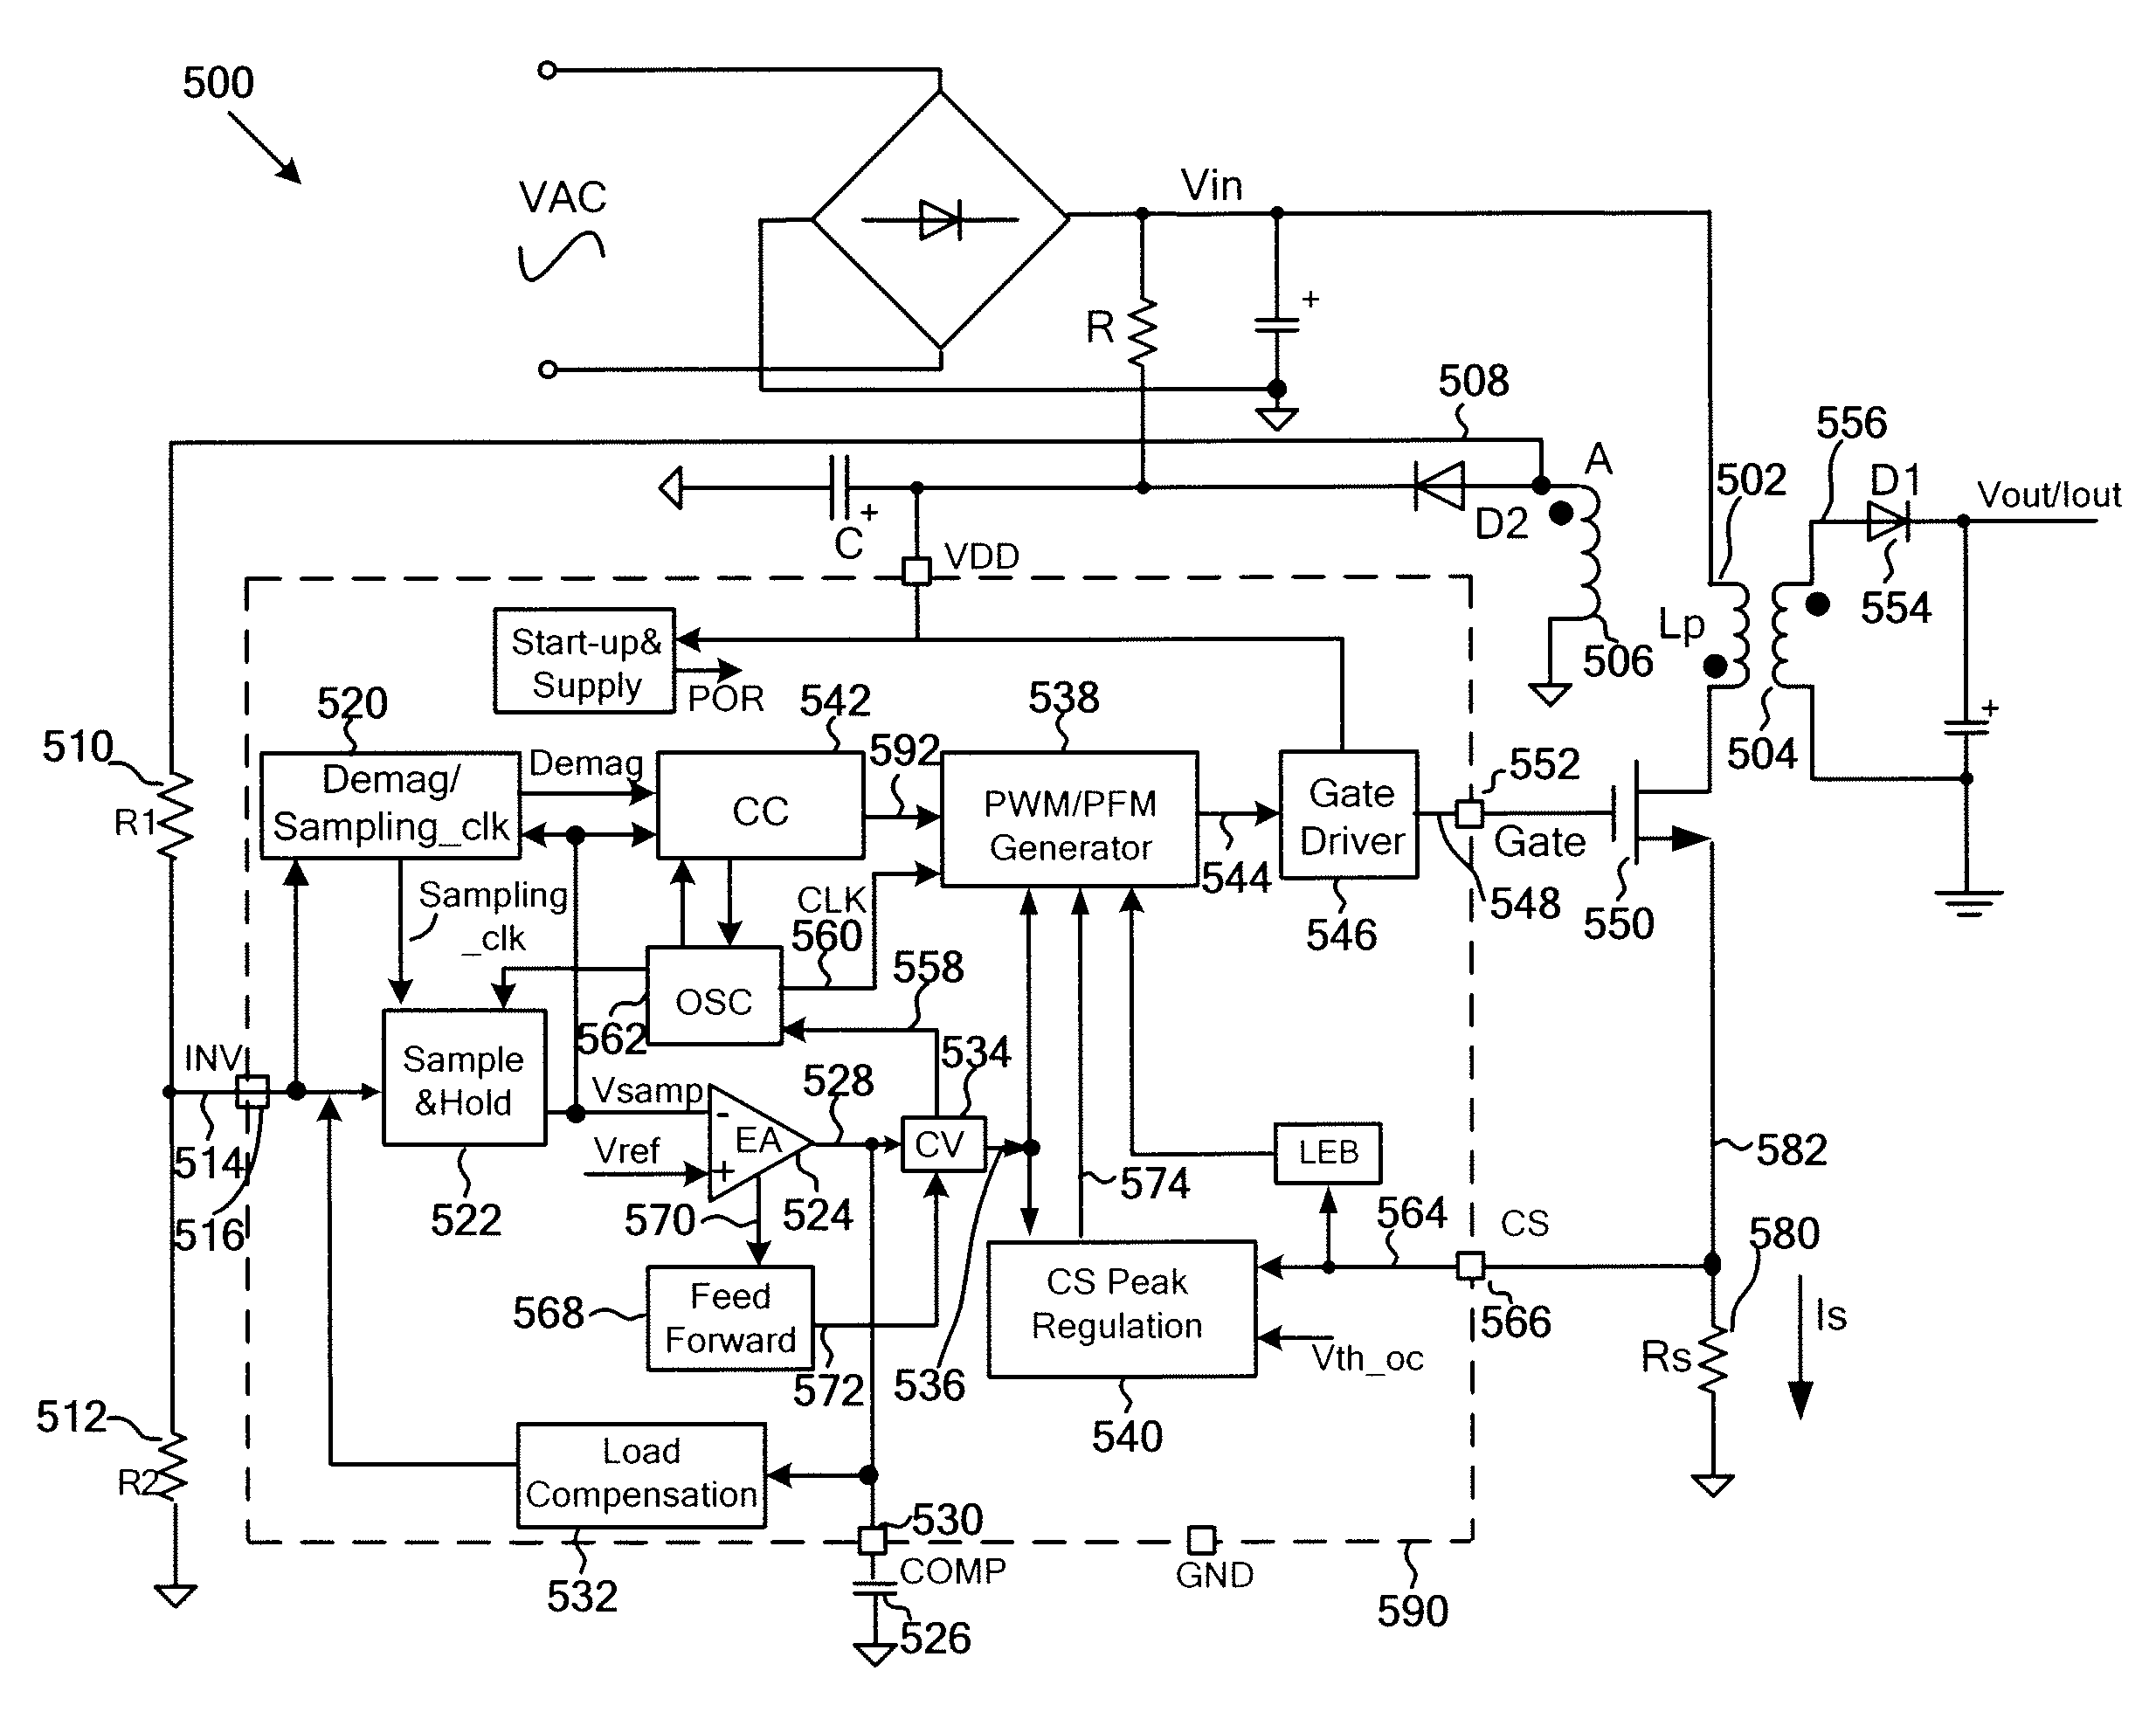 Systems and methods for constant voltage mode and constant current mode in flyback power converter with primary-side sensing and regulation